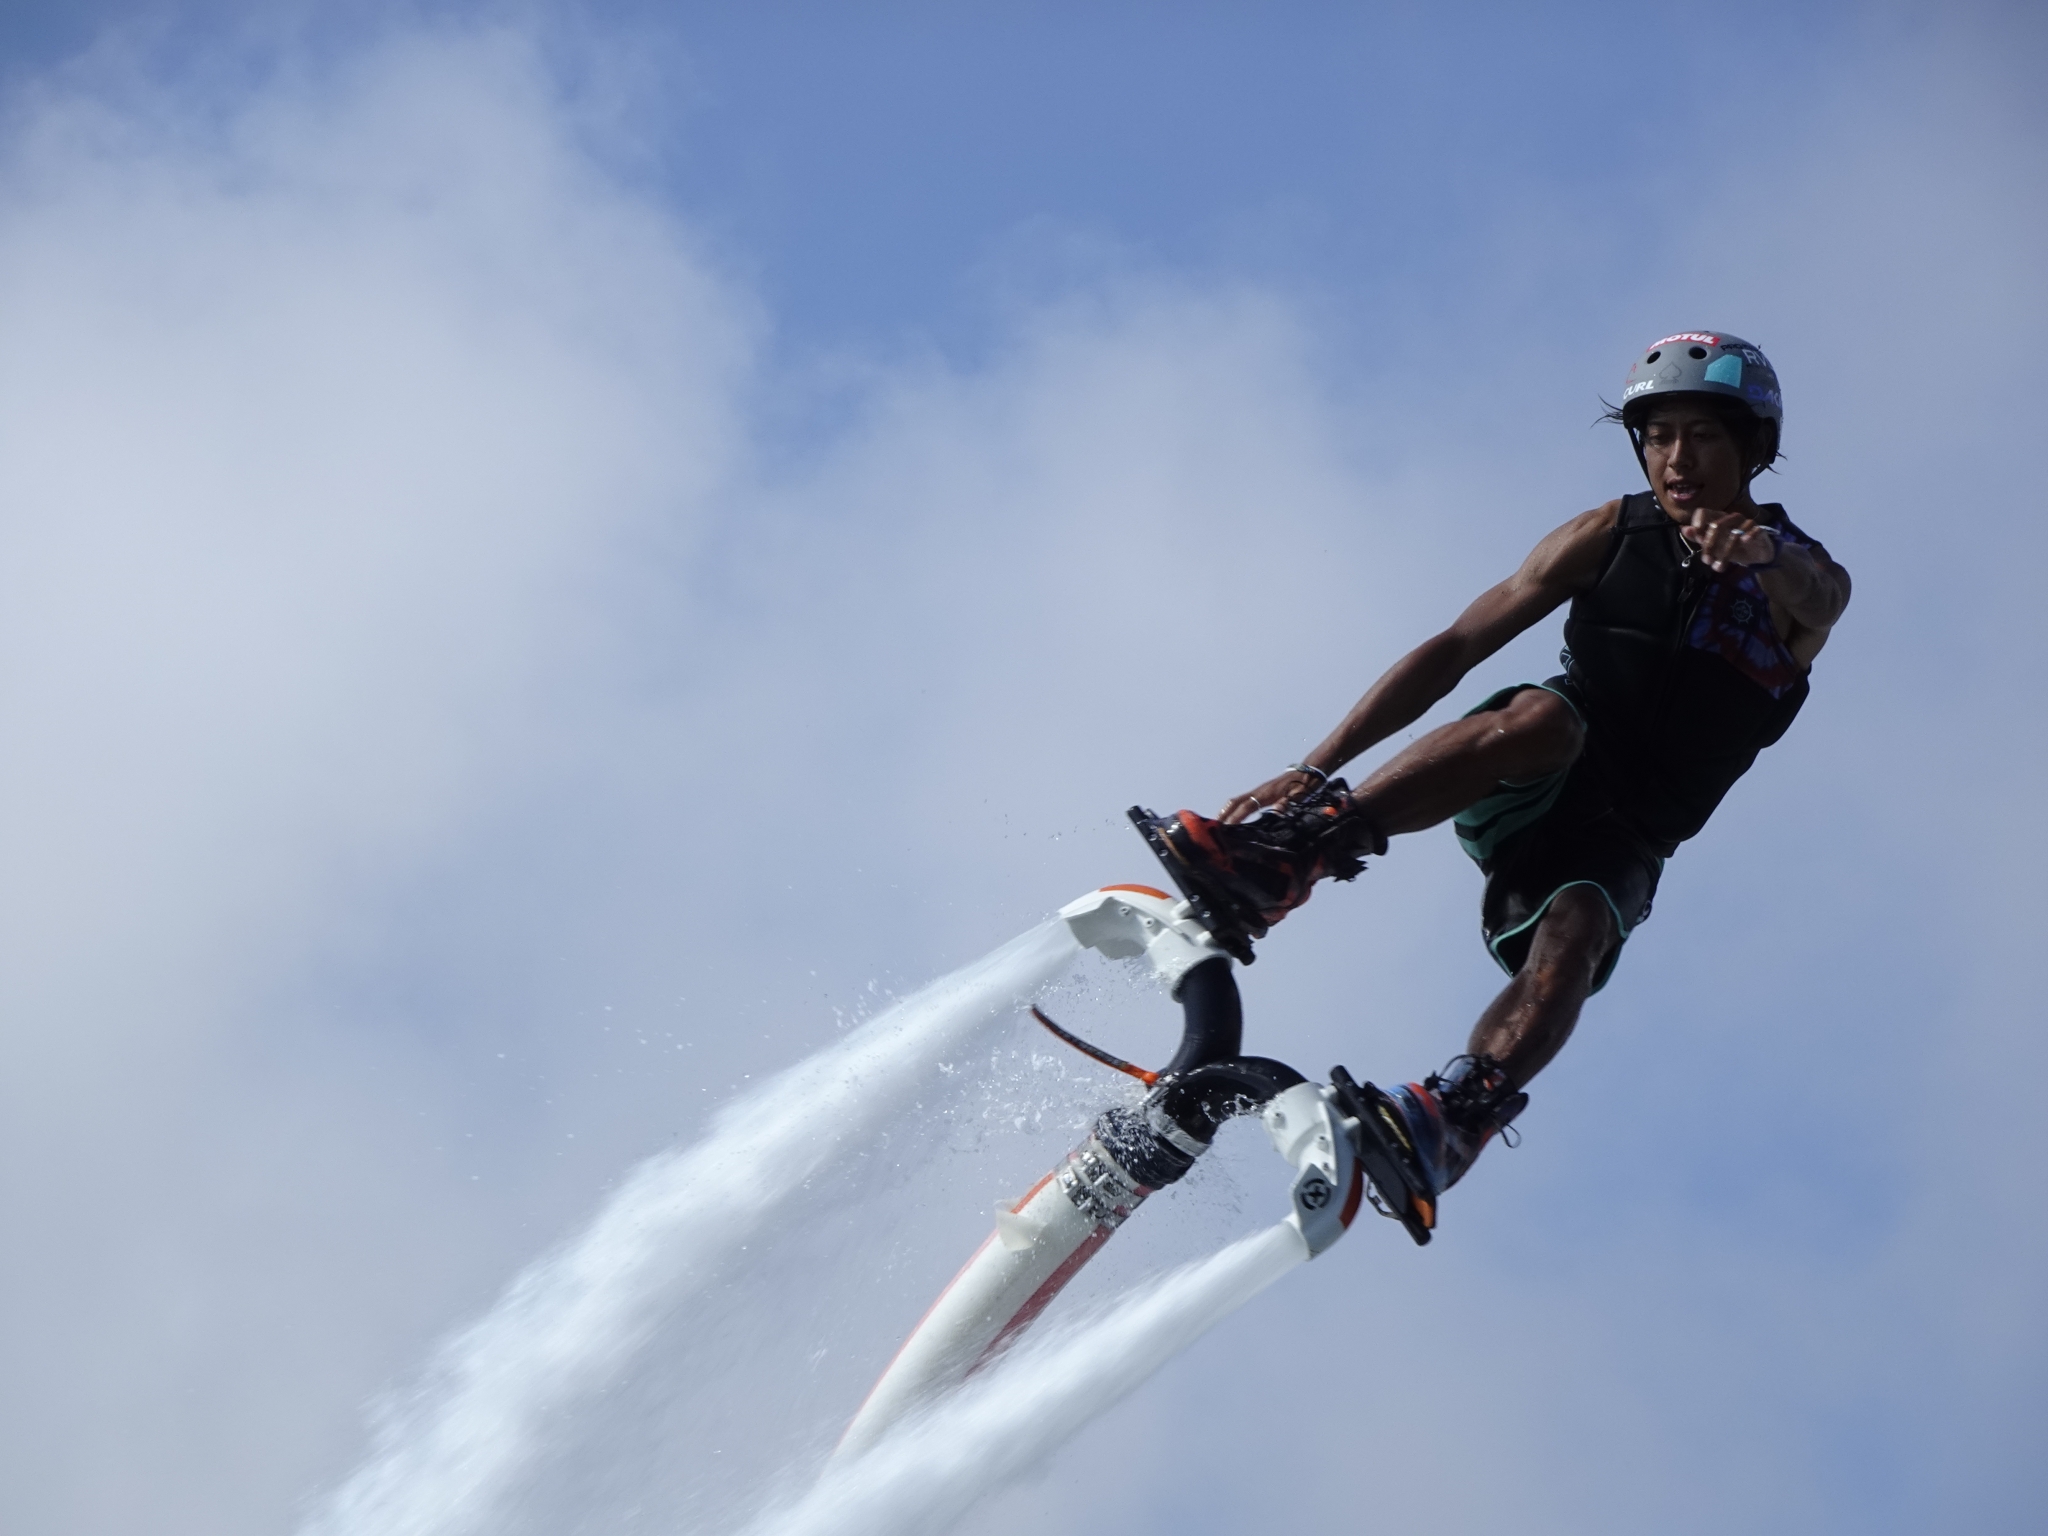 Man riding a flyboard high in the air, pointing towards the camera